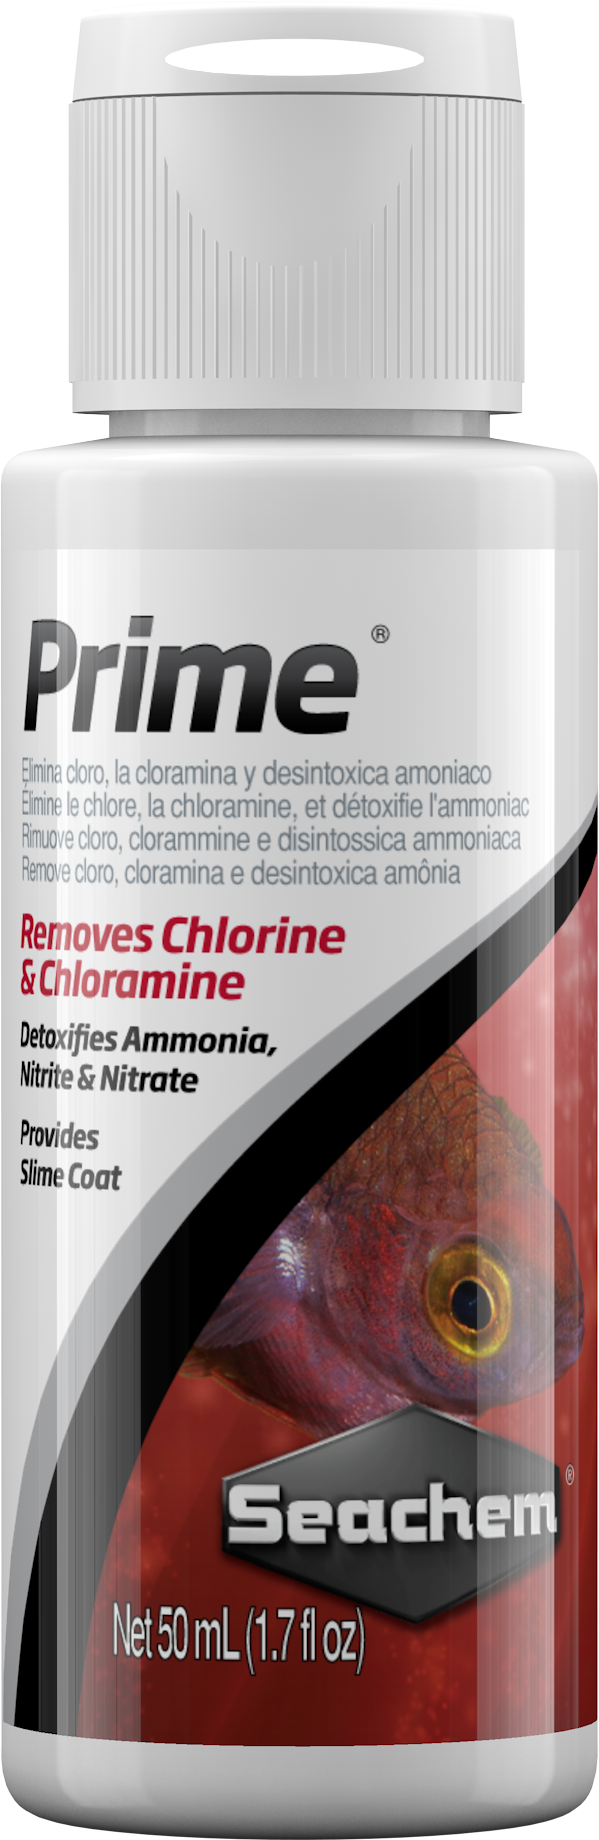 SEACHEM PRIME MARINE AND FRESHWATER CONDITIONER - CHEMICAL REMOVER AND DETOXIFIER